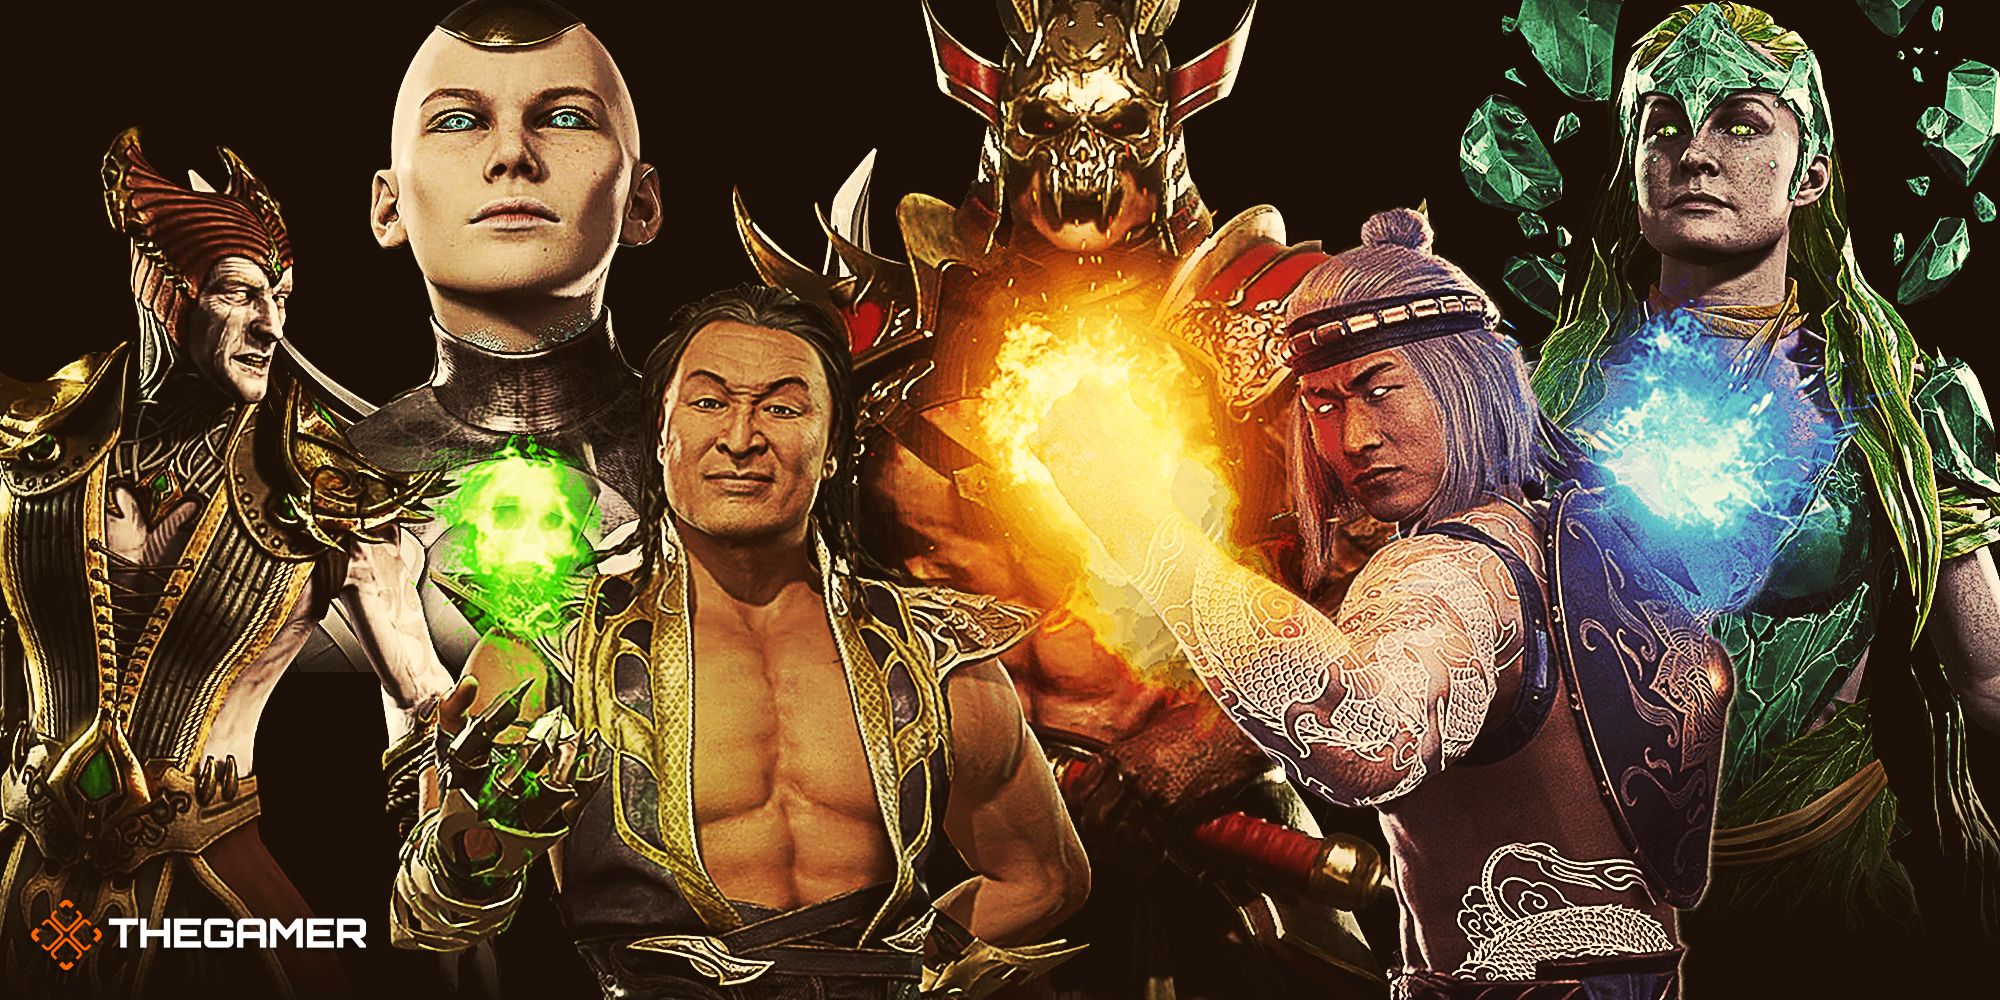 Character images from Mortal Kombat 11.